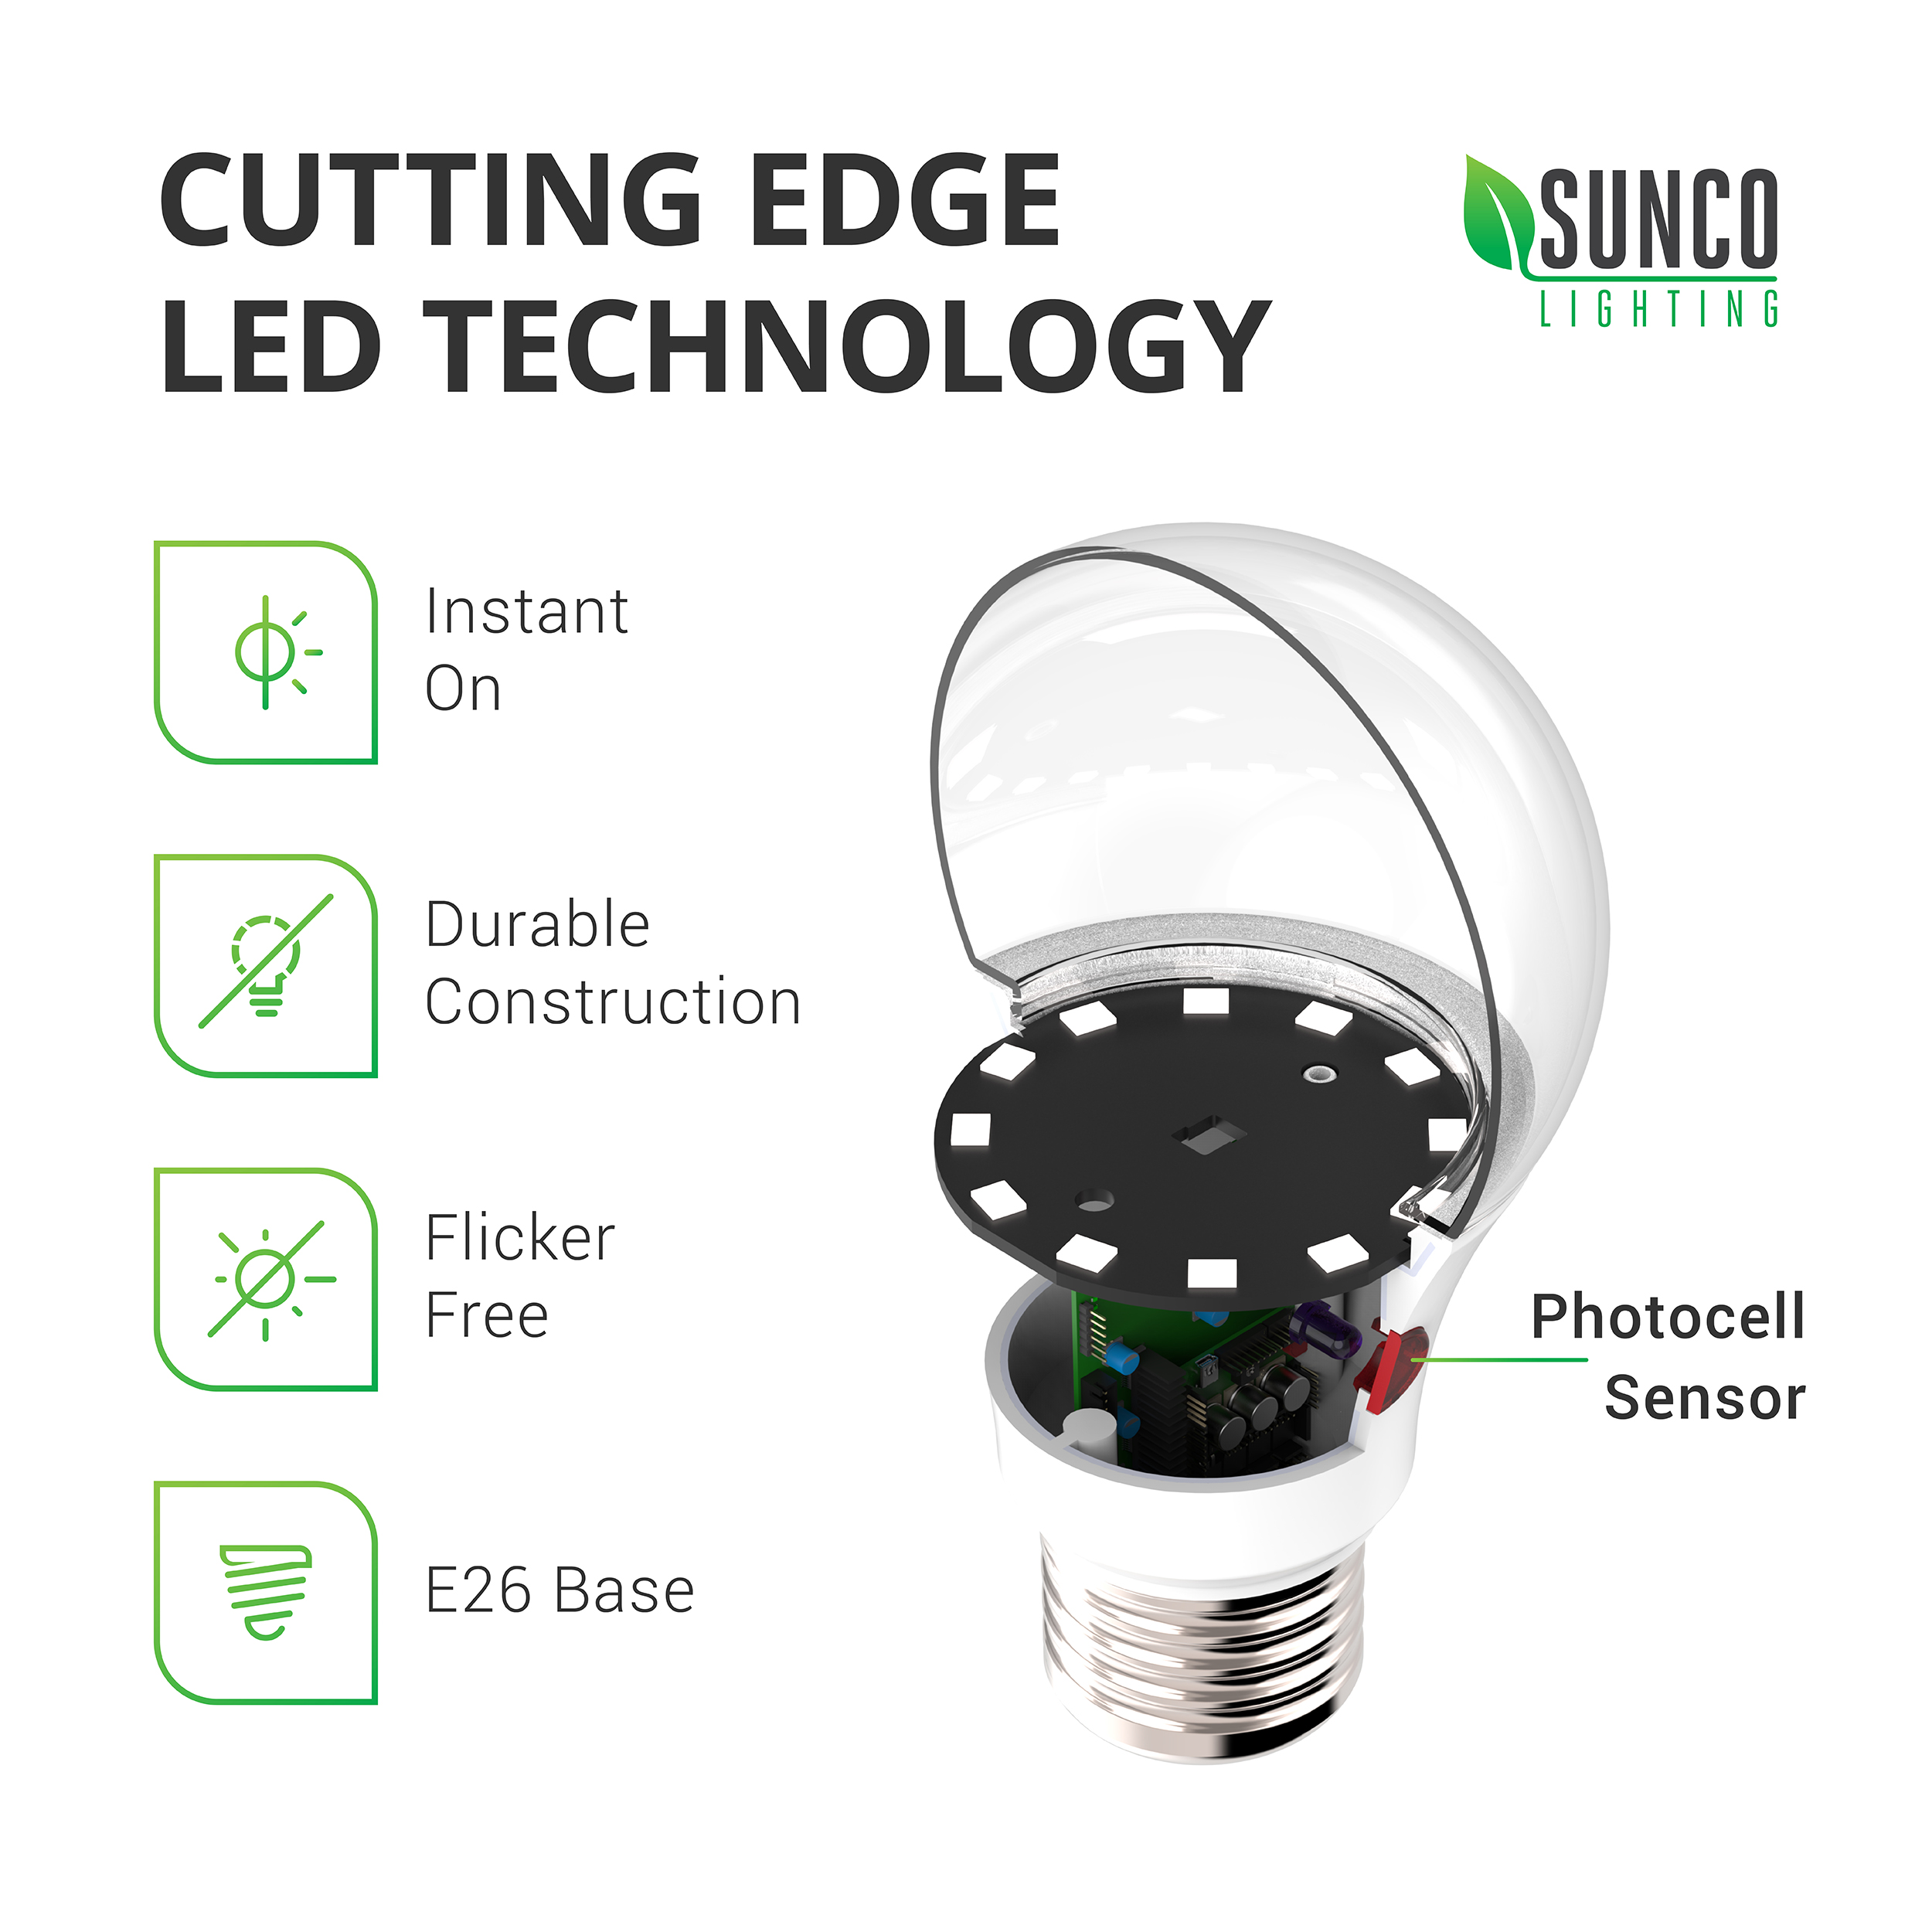 Sunco Lighting 36 Pack A19 LED Bulb with Dusk to Dawn, 9W=60W, 800 LM,  4000K Cool White, Auto On/Off Photocell Sensor UL